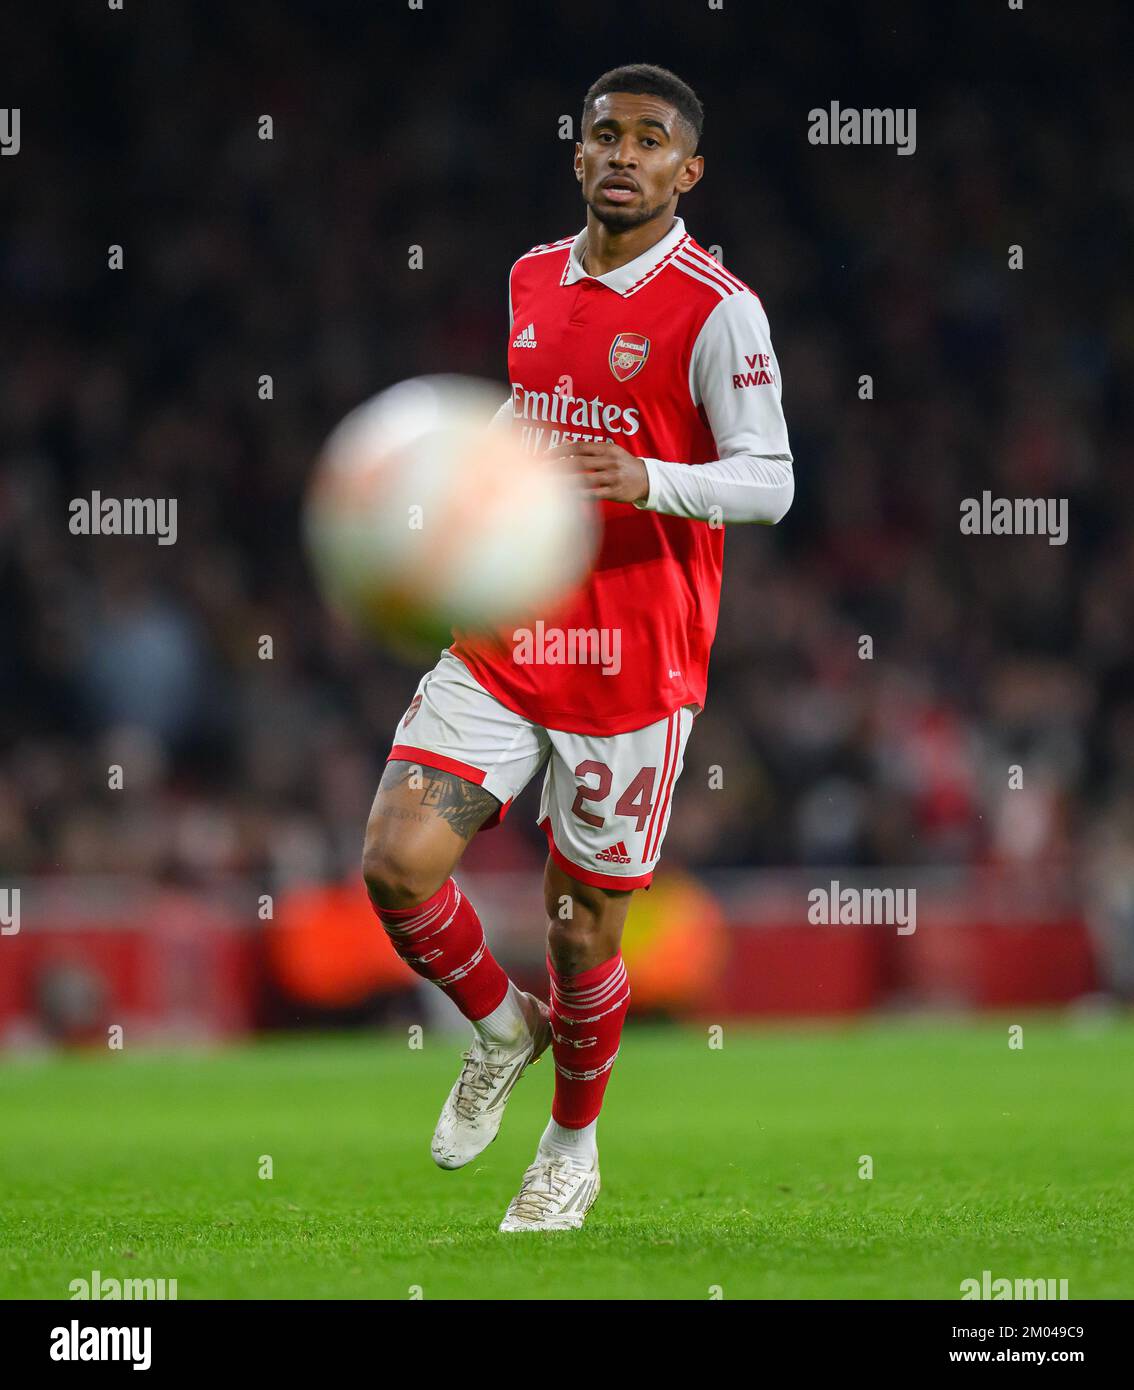 03 Nov 2022 - Arsenal v FC Zurich - UEFA Europa League - Group A - Emirates Stadium   Arsenal's Reiss Nelson during the match against FC Zurich Picture : Mark Pain / Alamy Stock Photo